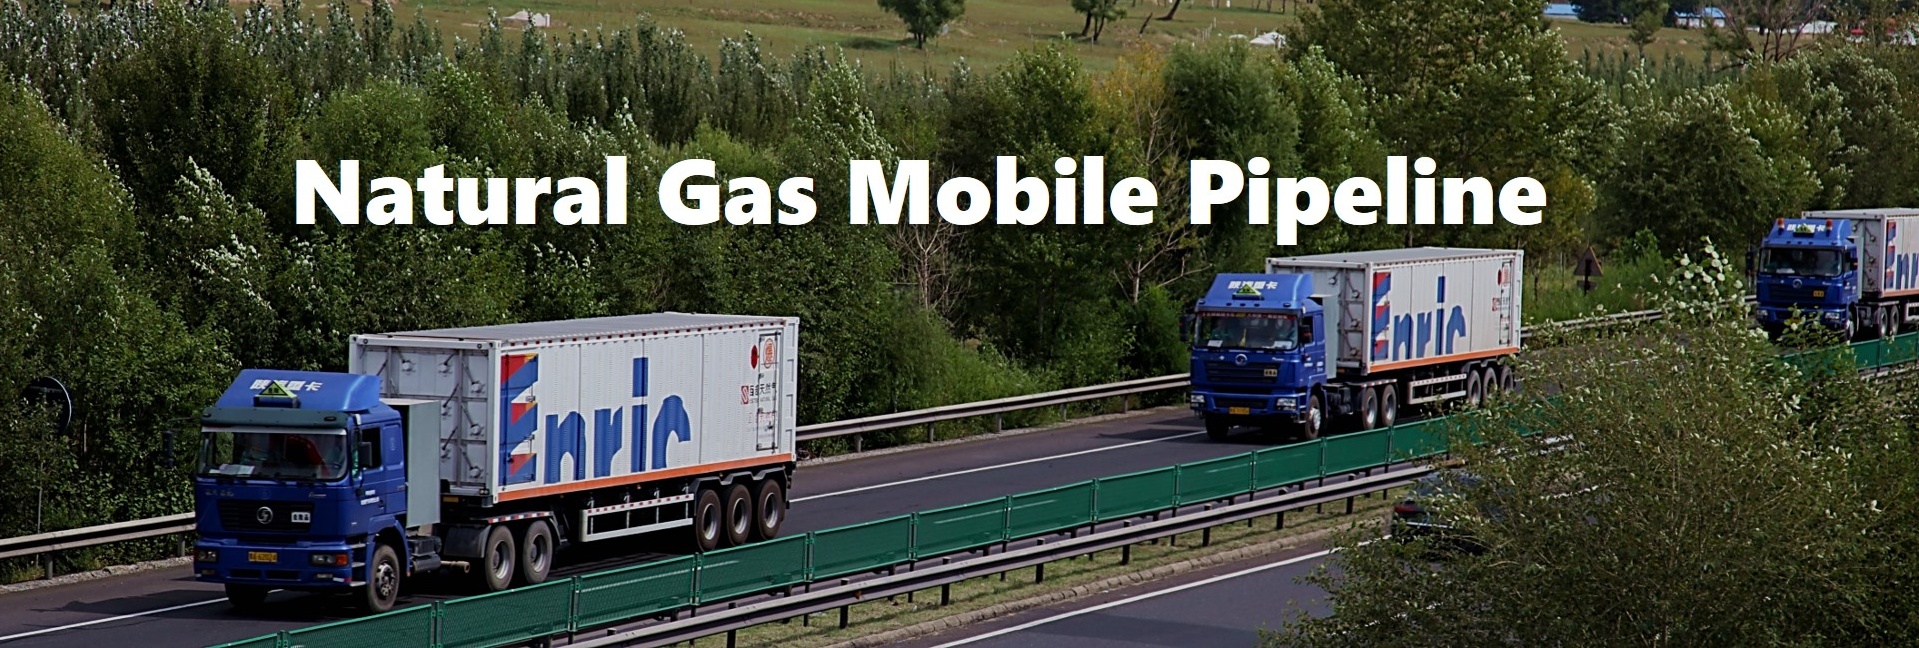 CNG Mobile Pipeline